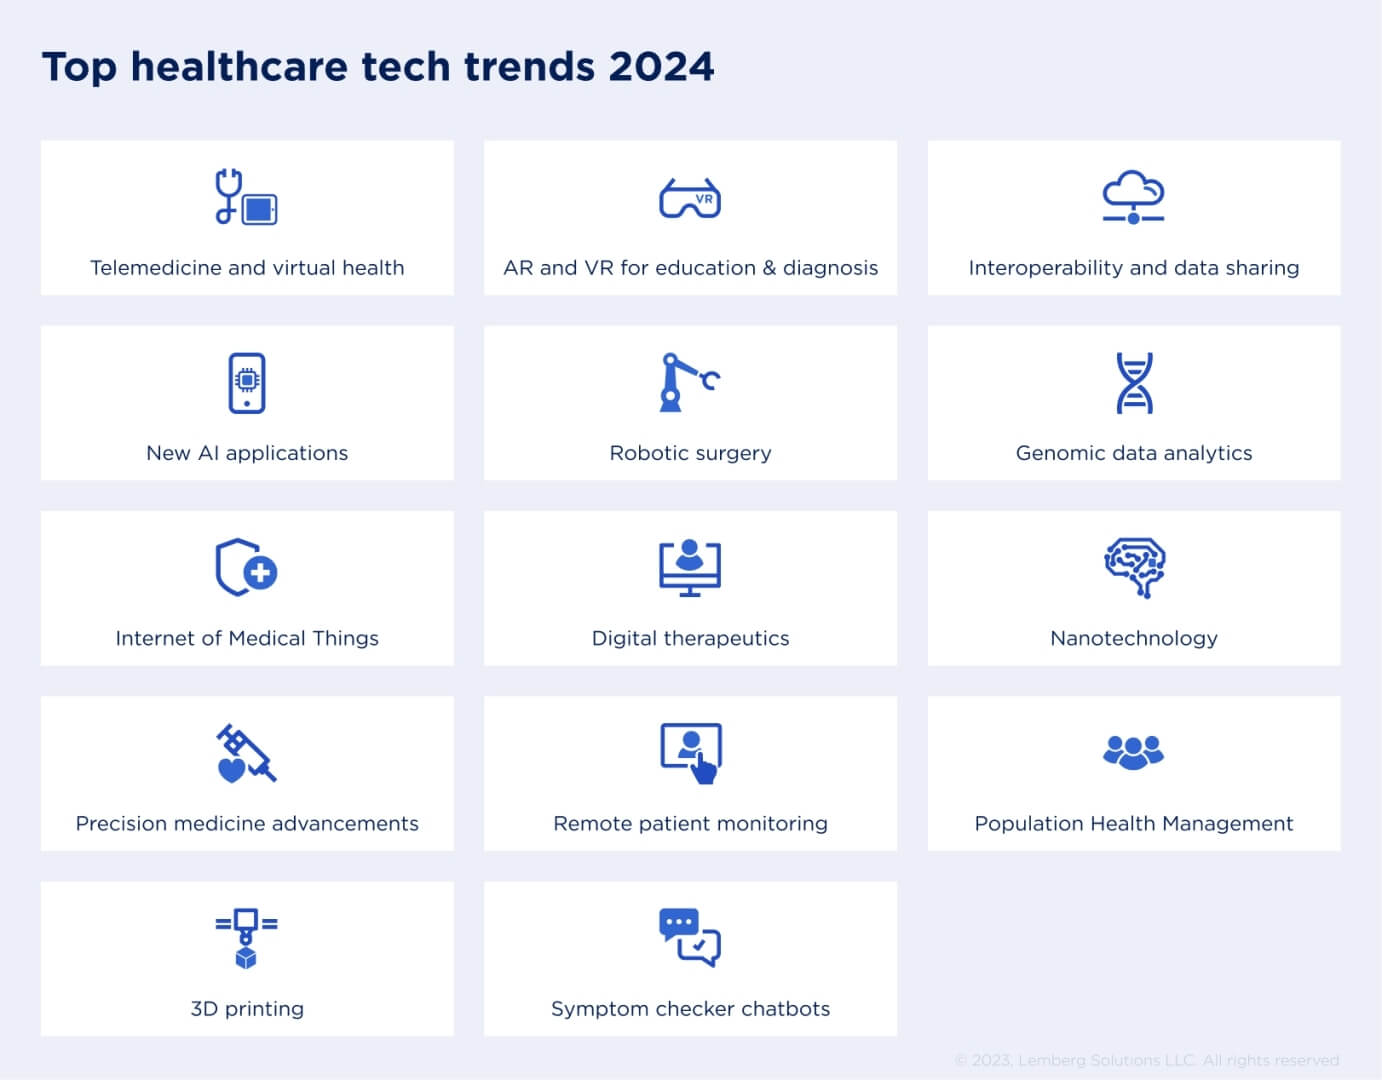 Healthcare tech trends 2024 article - Body image 5 - Lemberg Solutions.jpg